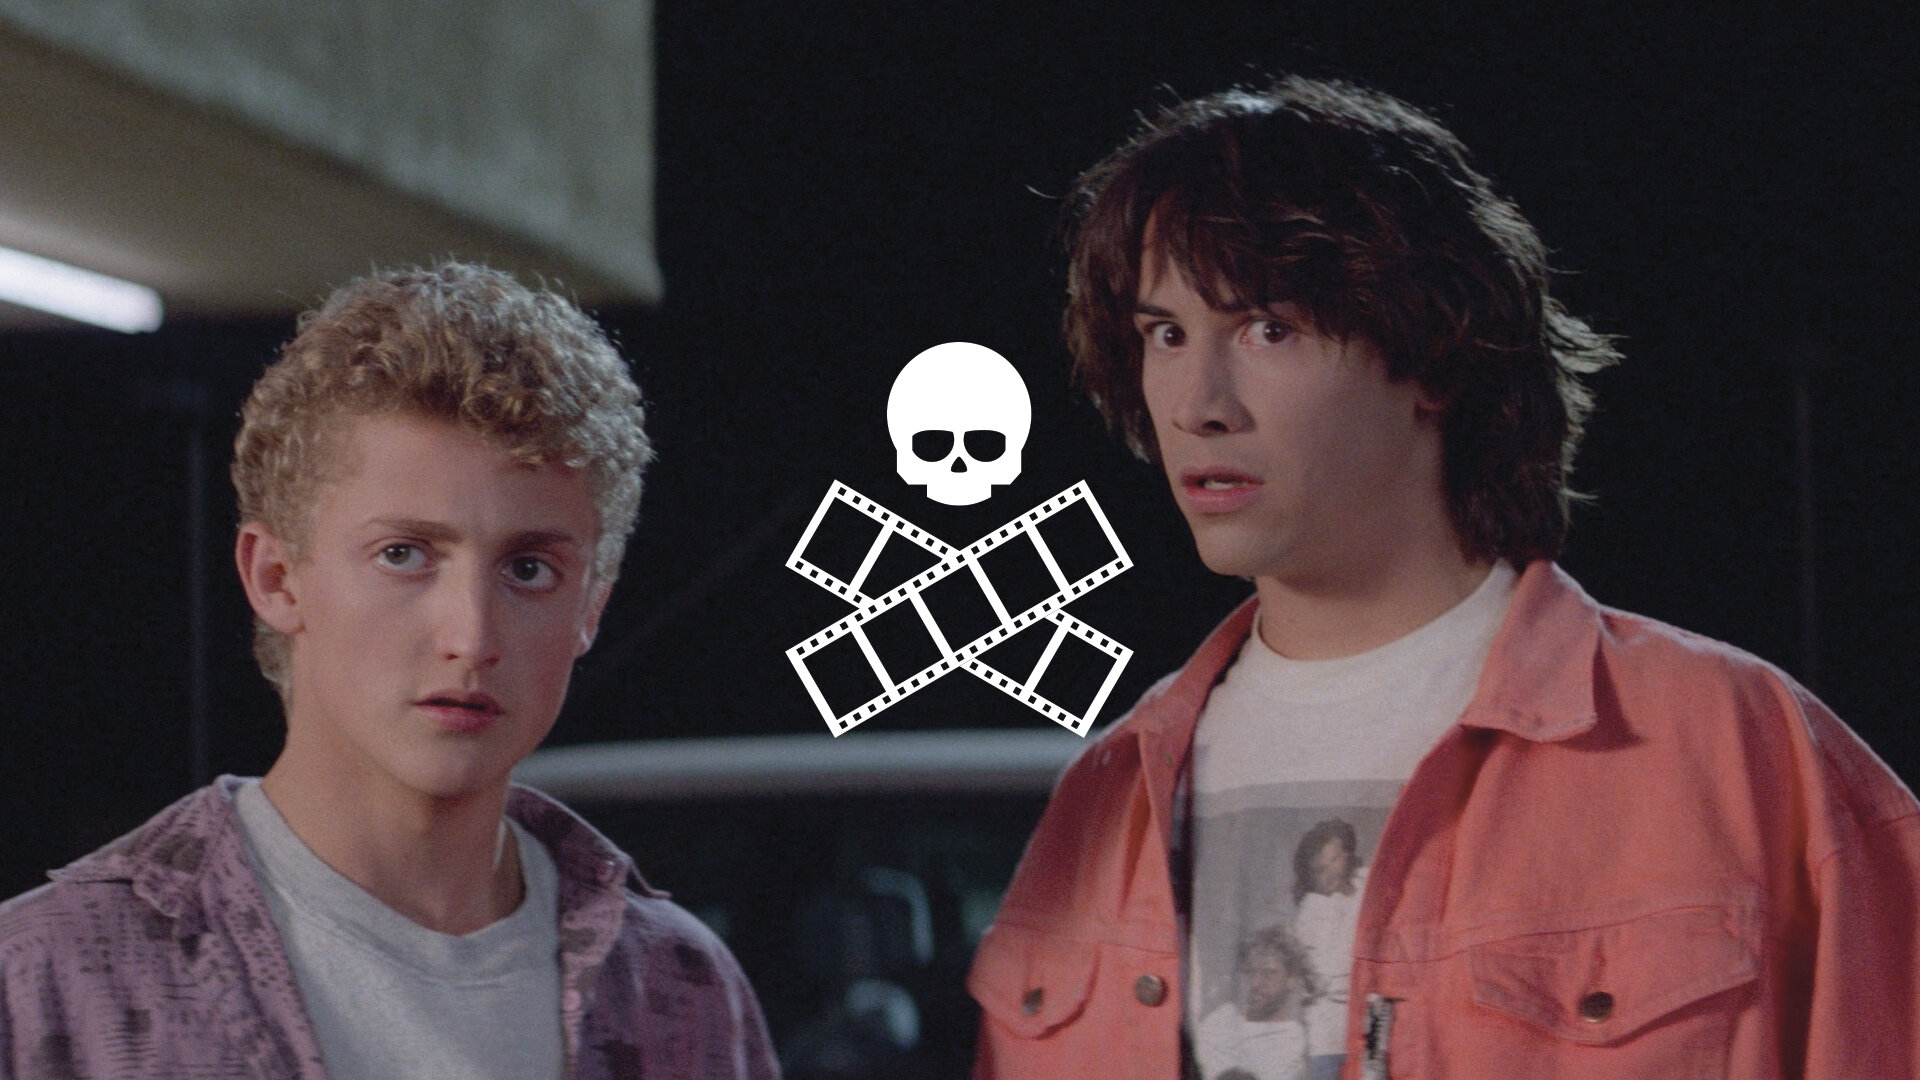 176. Bill & Ted's Excellent Adventure